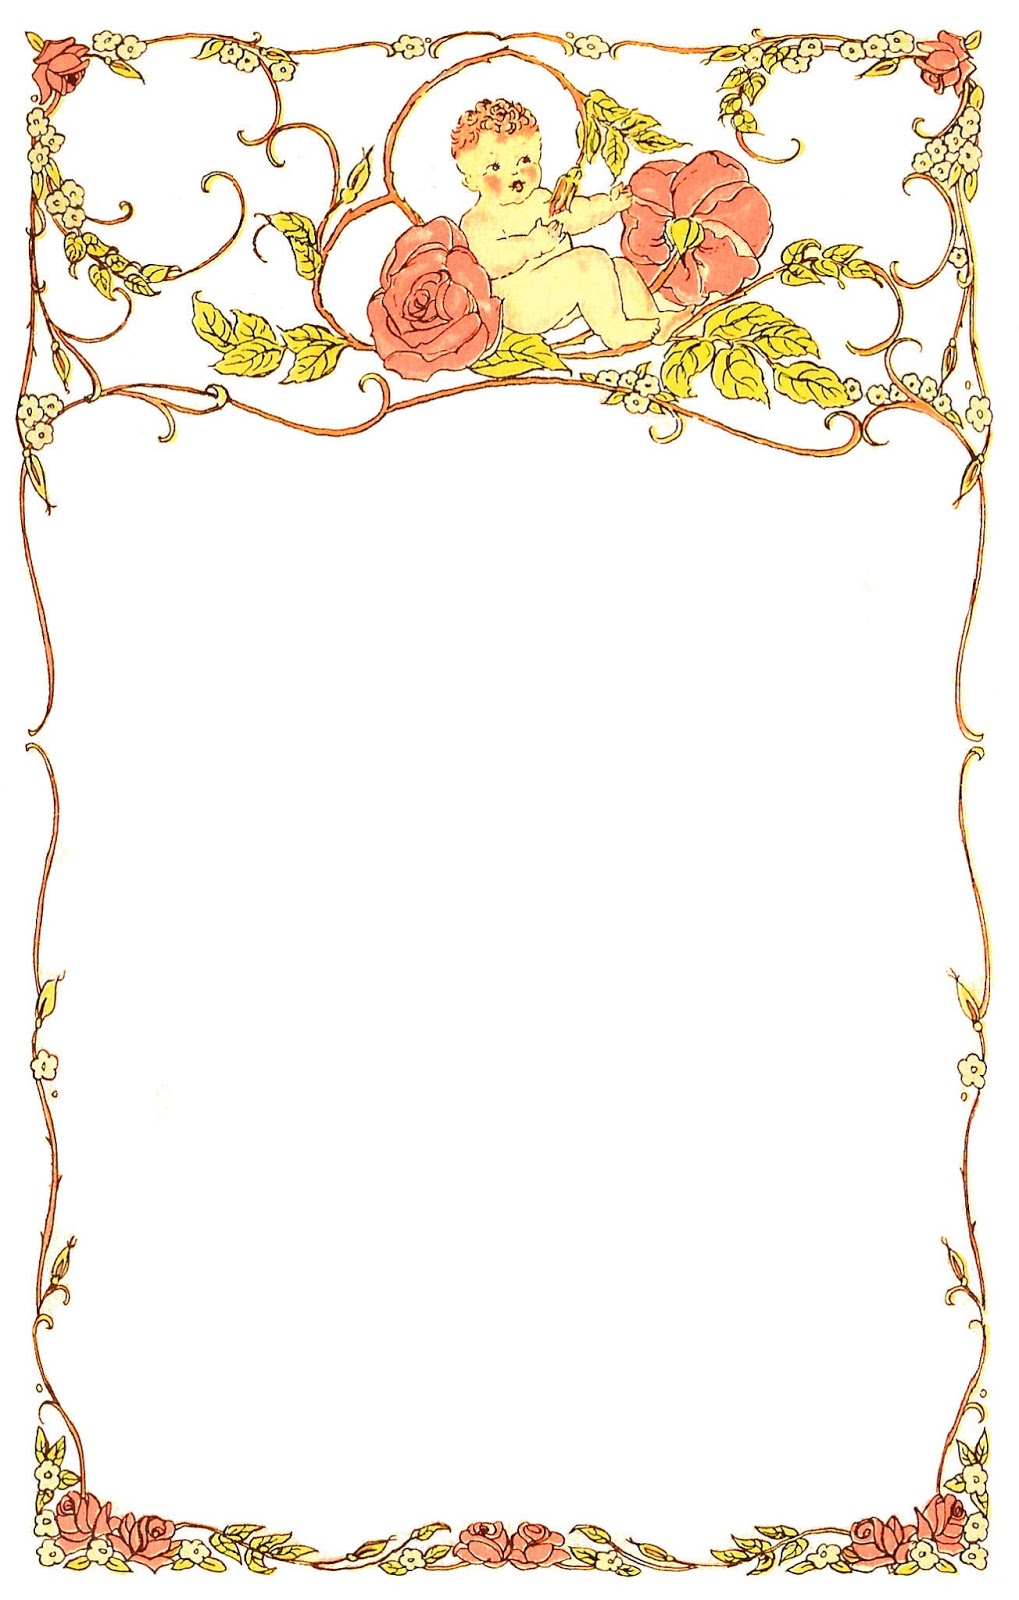 Antique Images: Free Printable Digital Frame: Baby and Roses ...